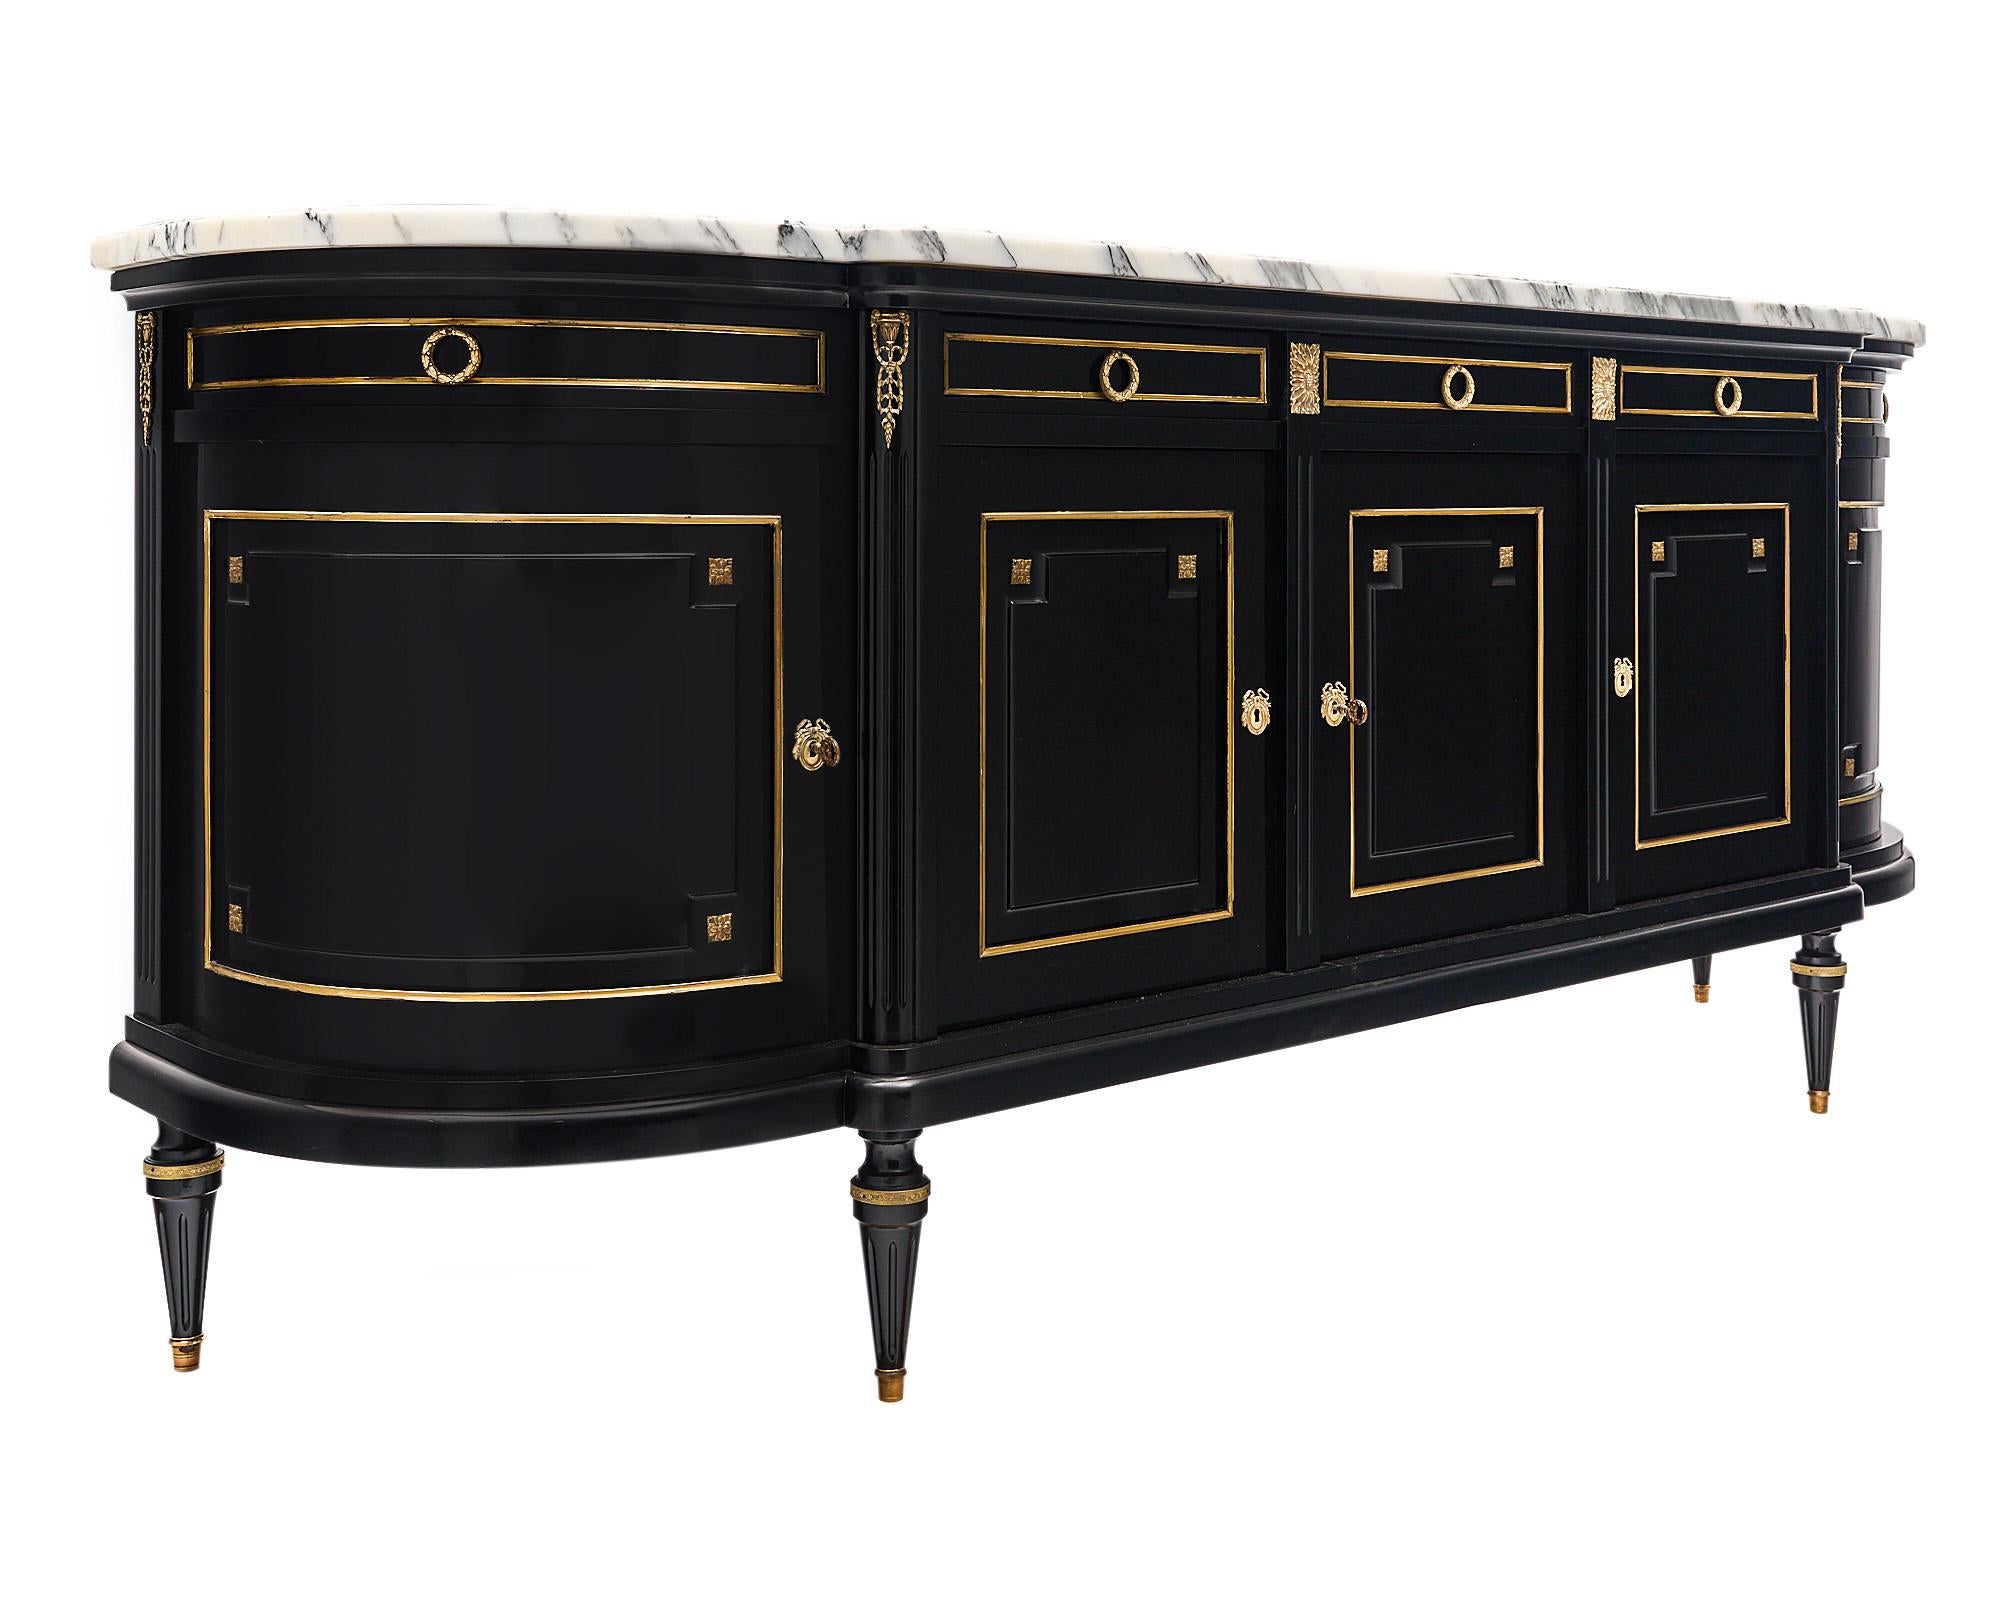 Buffet / enfilade from France made of solid mahogany that has been finished in a museum-quality French polish for a lustrous effect. There are five doors that open to interior shelving below five dovetailed drawers. The ends have curved drawers and